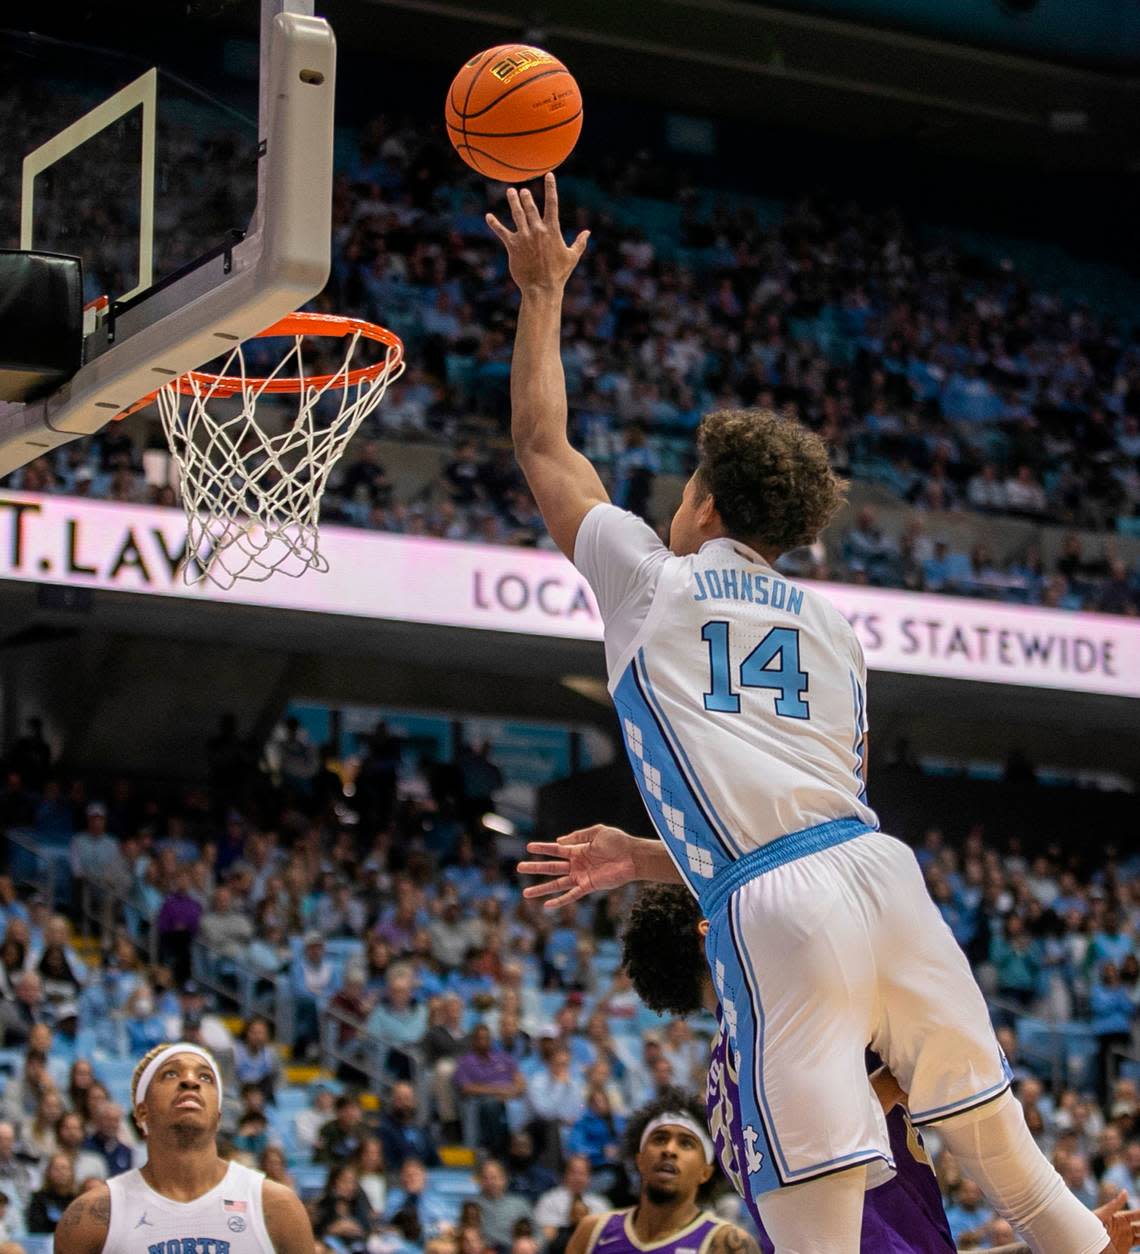 North Carolina’s Puff Johnson (14) puts up a shot in the second has against James Madison on Sunday, November 20, 2022 at the Smith Center in Chapel Hill, N. C. Johnson saw his first action of the season against James Madison.